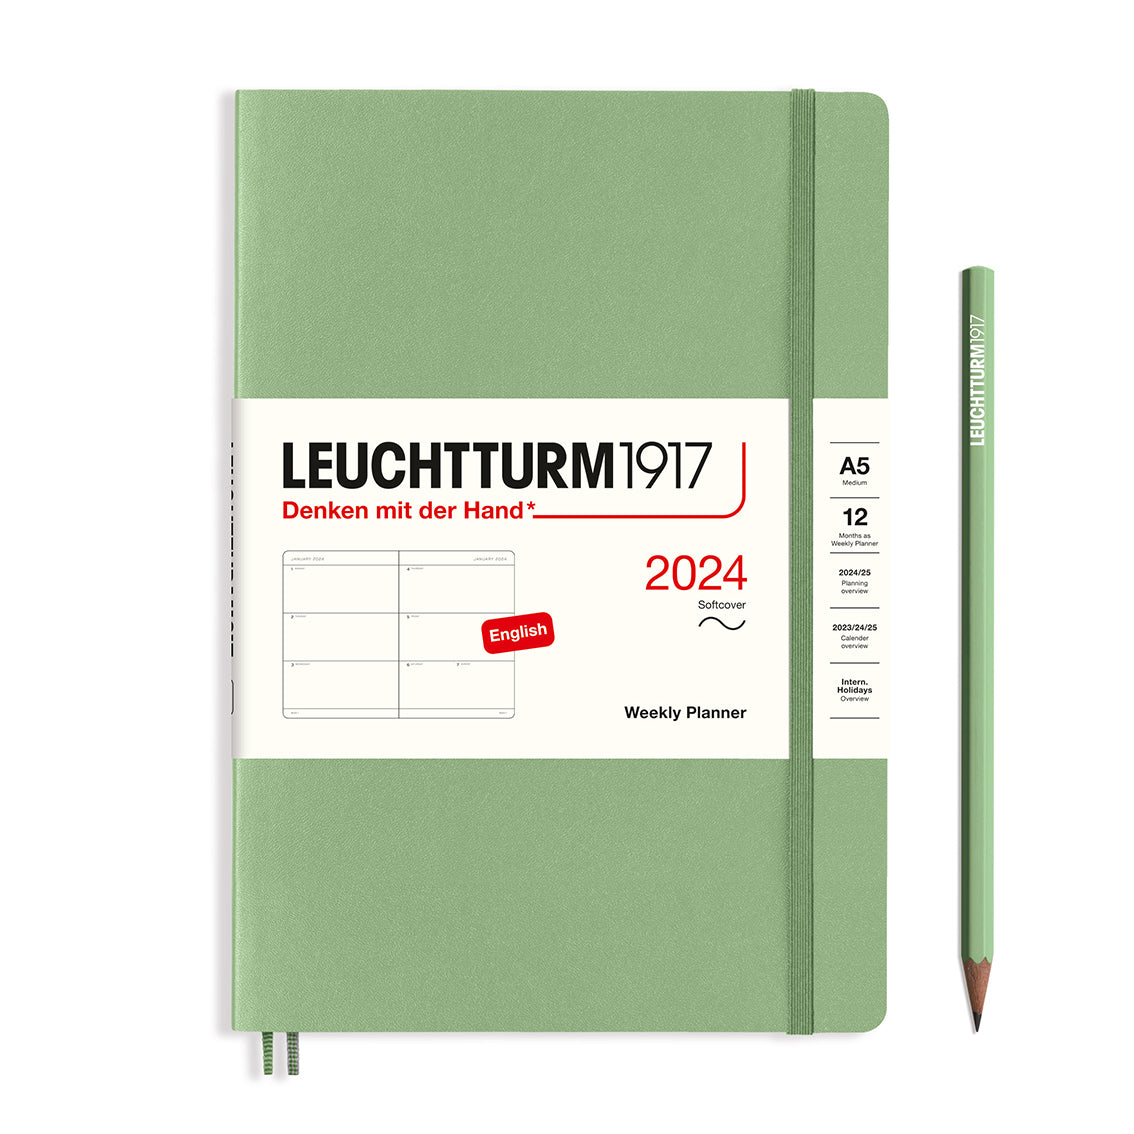 Leuchtturm1917 Weekly Planner Medium 2024 Softcover(A5) - Blesket Canada